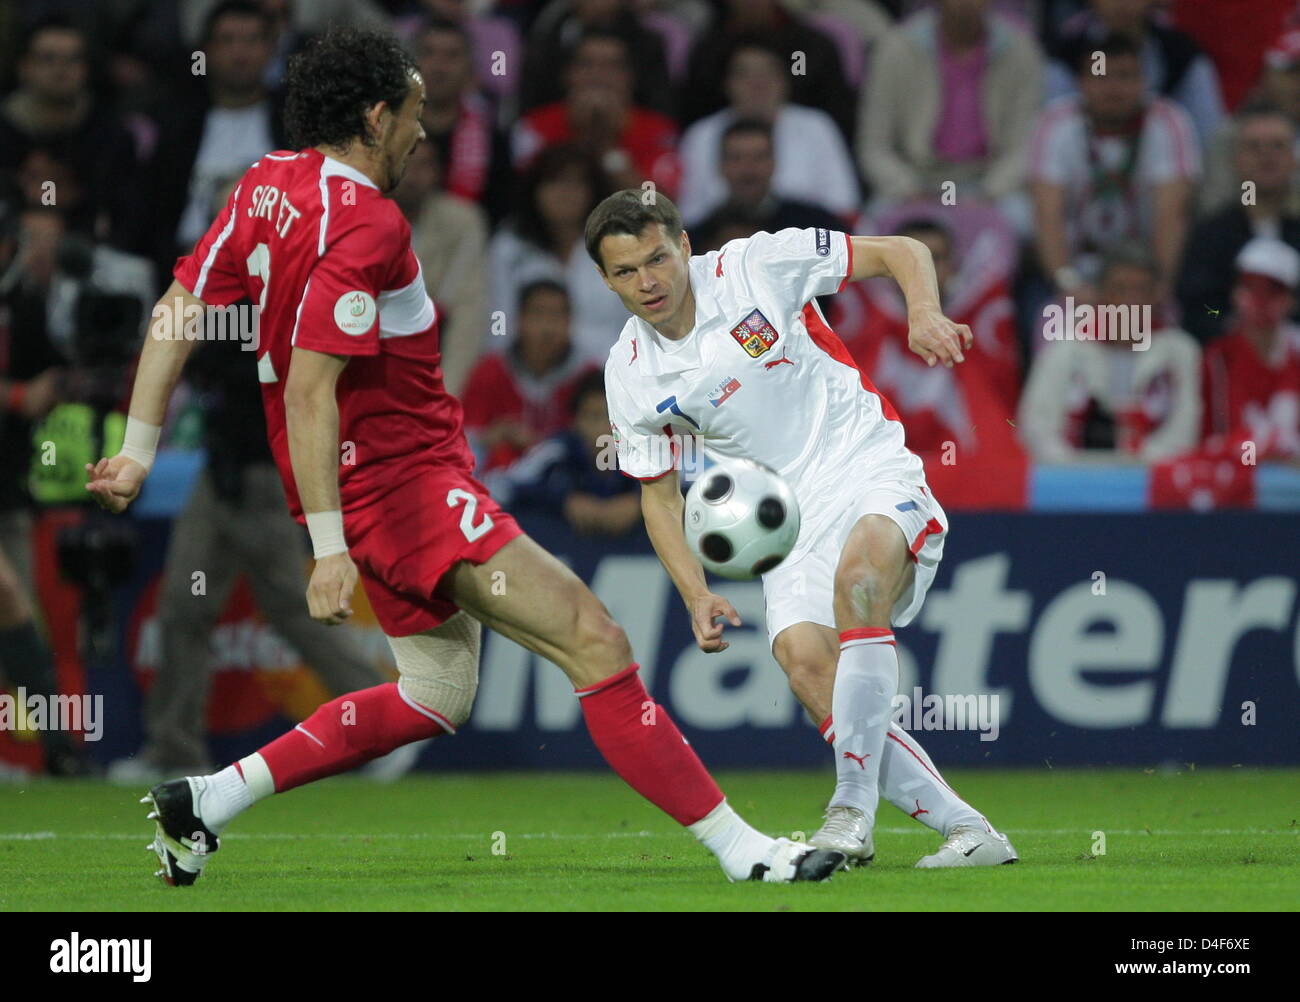 Mehmet Aurelio (L) of Turkey vies with Libor Sionko of Czech Republic during the UEFA EURO 2008 Group A preliminary round match between Turkey and Czech Republic at the Stade de Geneve stadium in Geneva, Switzerland 15 June 2008. Photo: Ronald Wittek dpa +please note UEFA restrictions particulary in regard to slide shows and 'No Mobile Services'+ +++(c) dpa - Bildfunk+++ Stock Photo